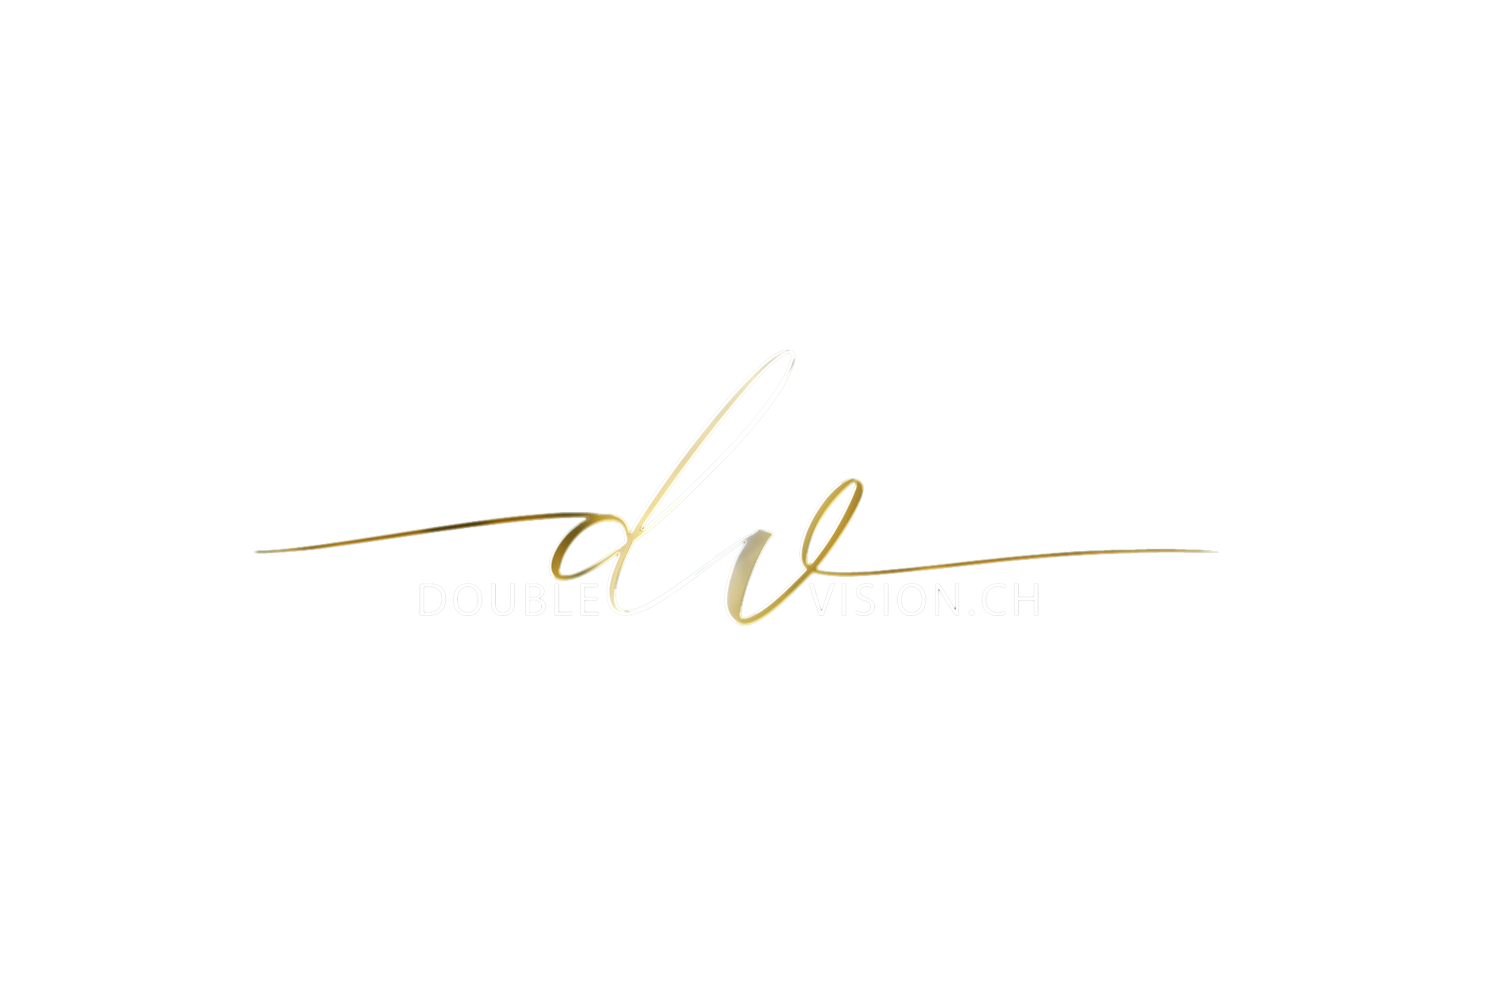 DOUBLE ViSION CH